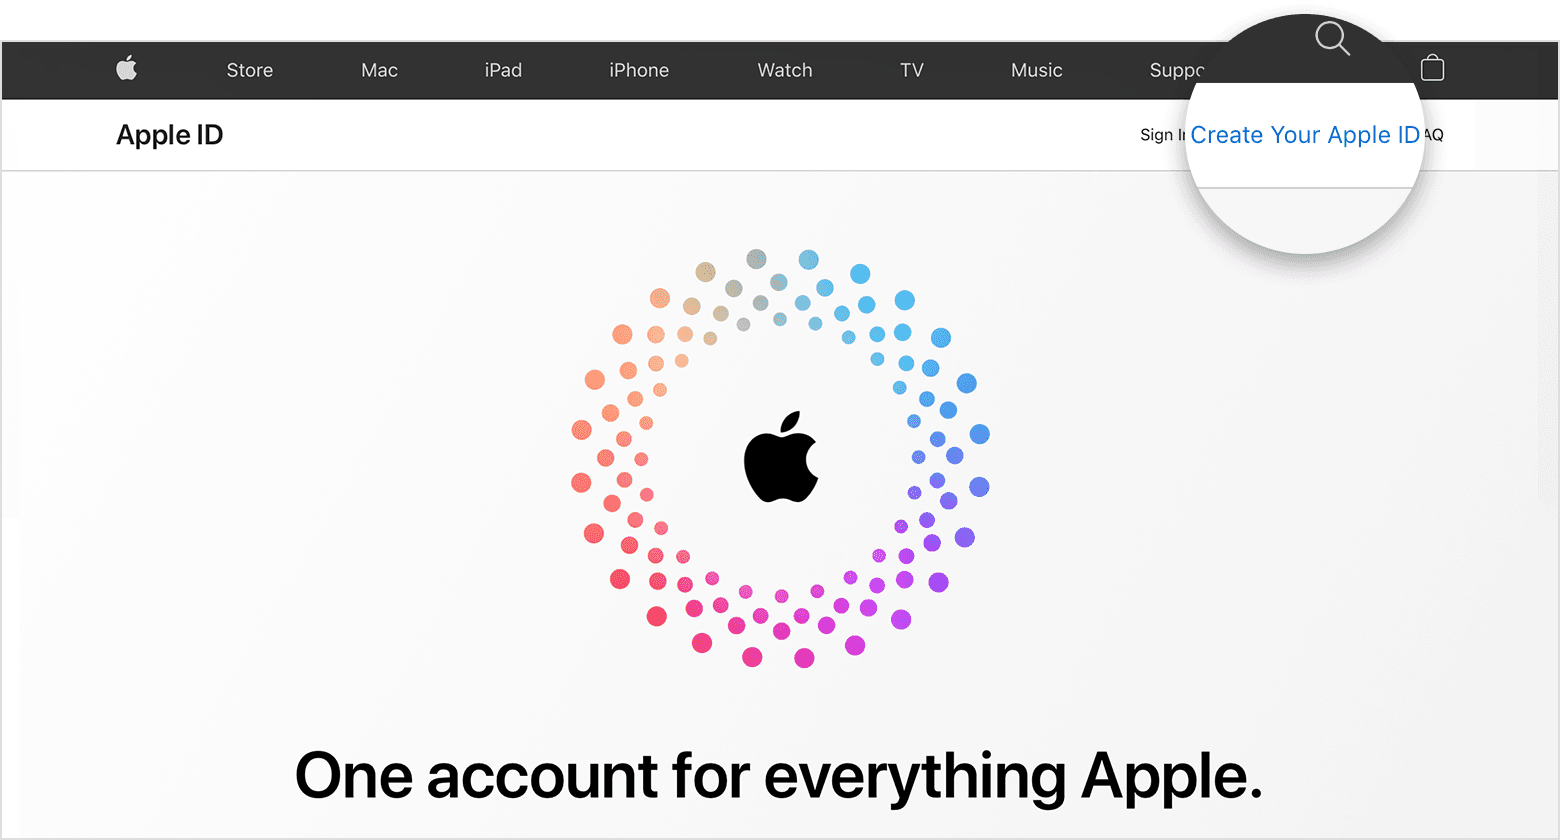 A screenshot of appleid.apple.com, which features an Apple logo in the center of the screen surrounded by concentric colored circles.